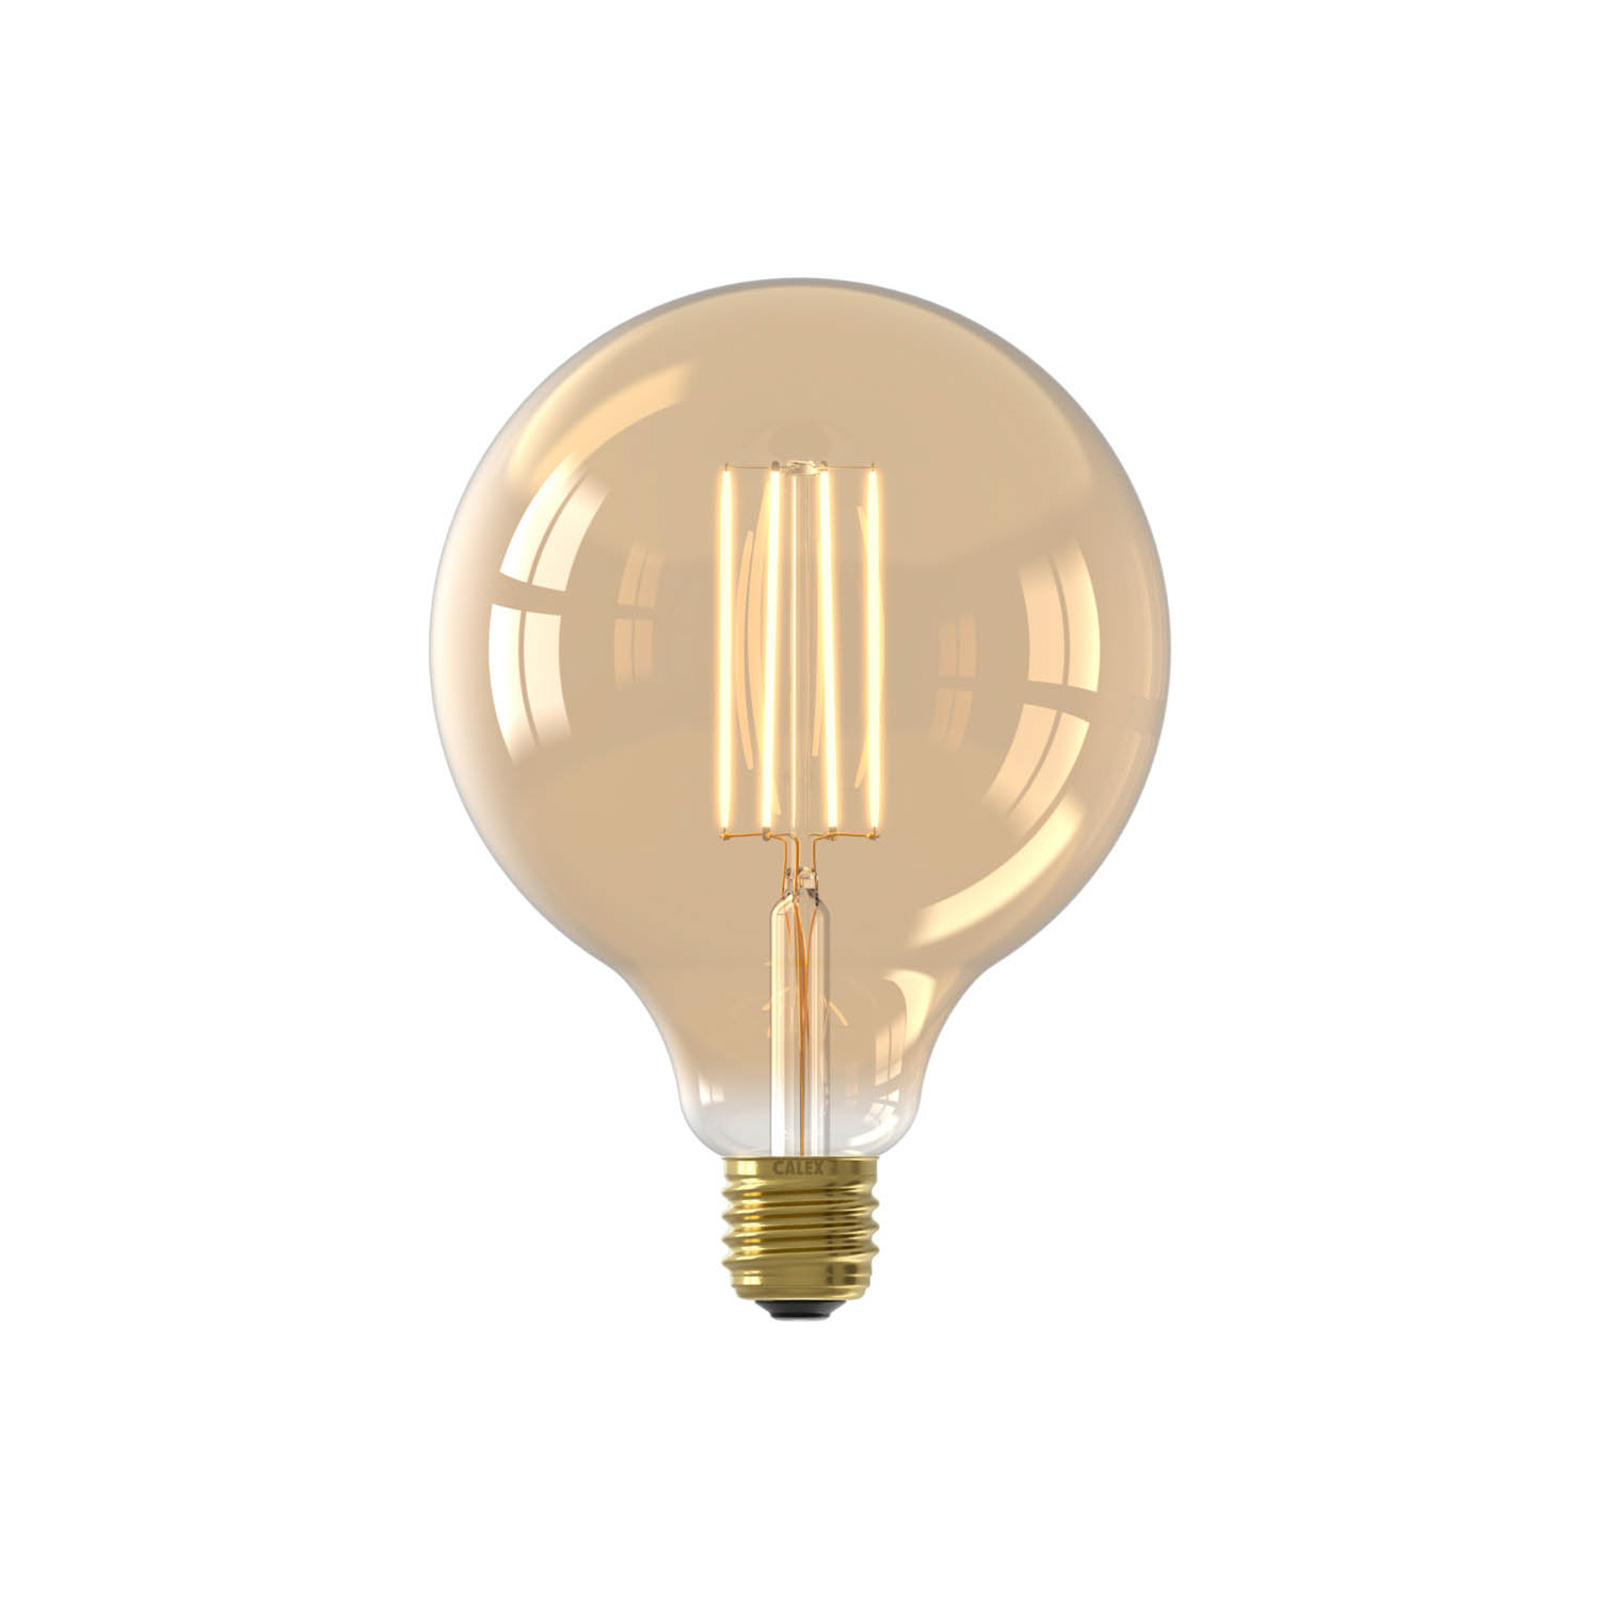 Calex E27 G80 3.5 W LED filament 821 gold dimmable